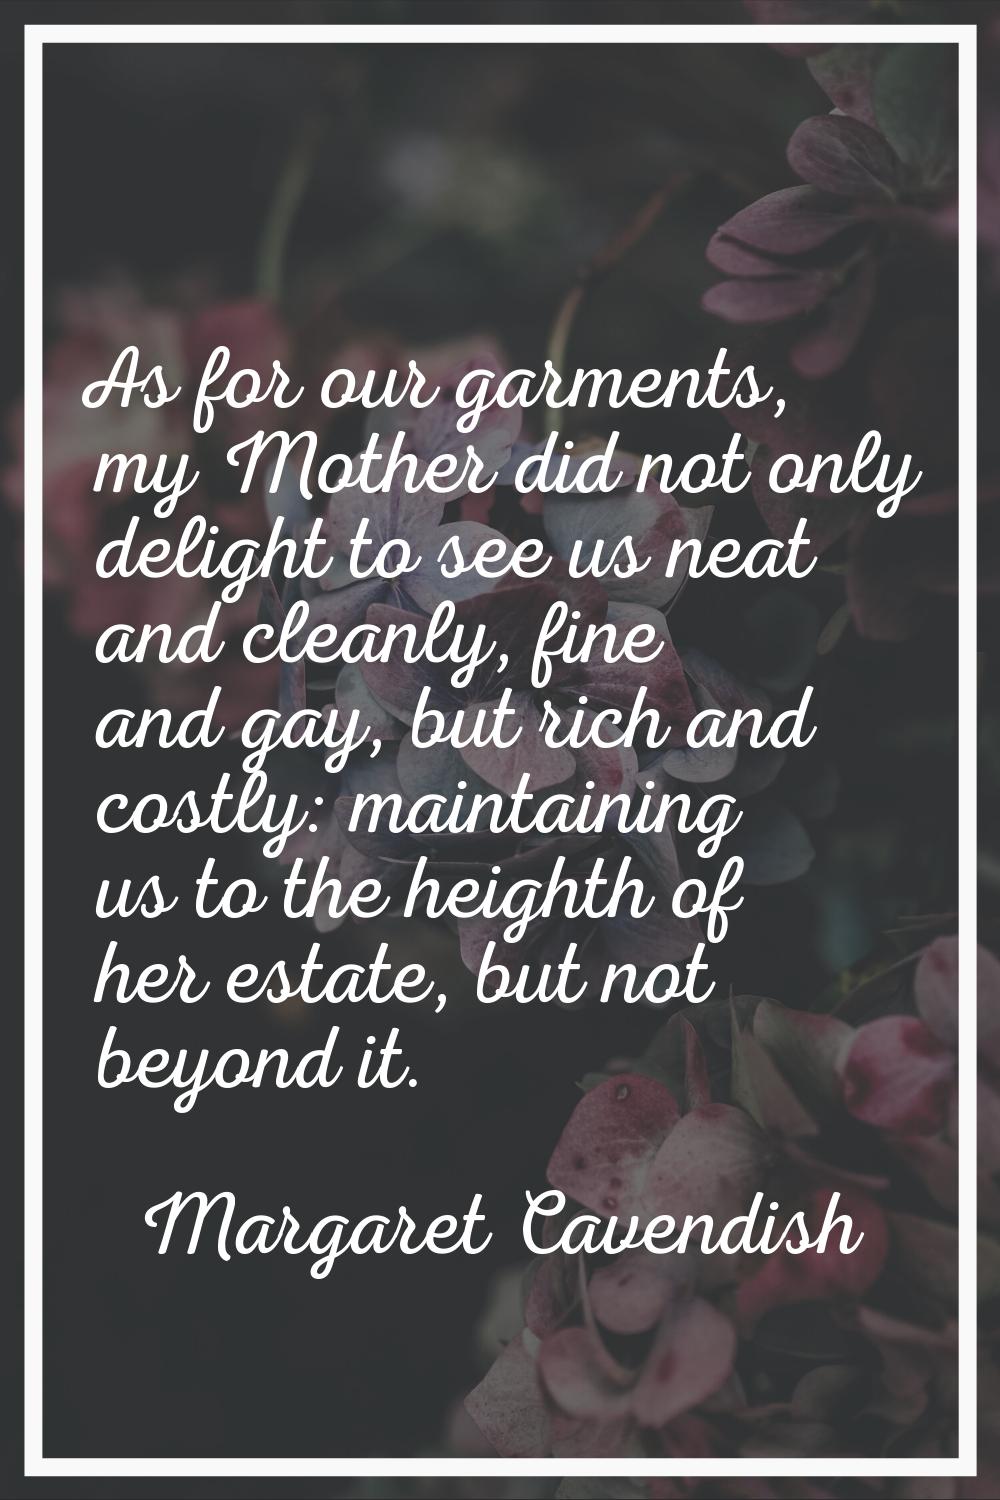 As for our garments, my Mother did not only delight to see us neat and cleanly, fine and gay, but r